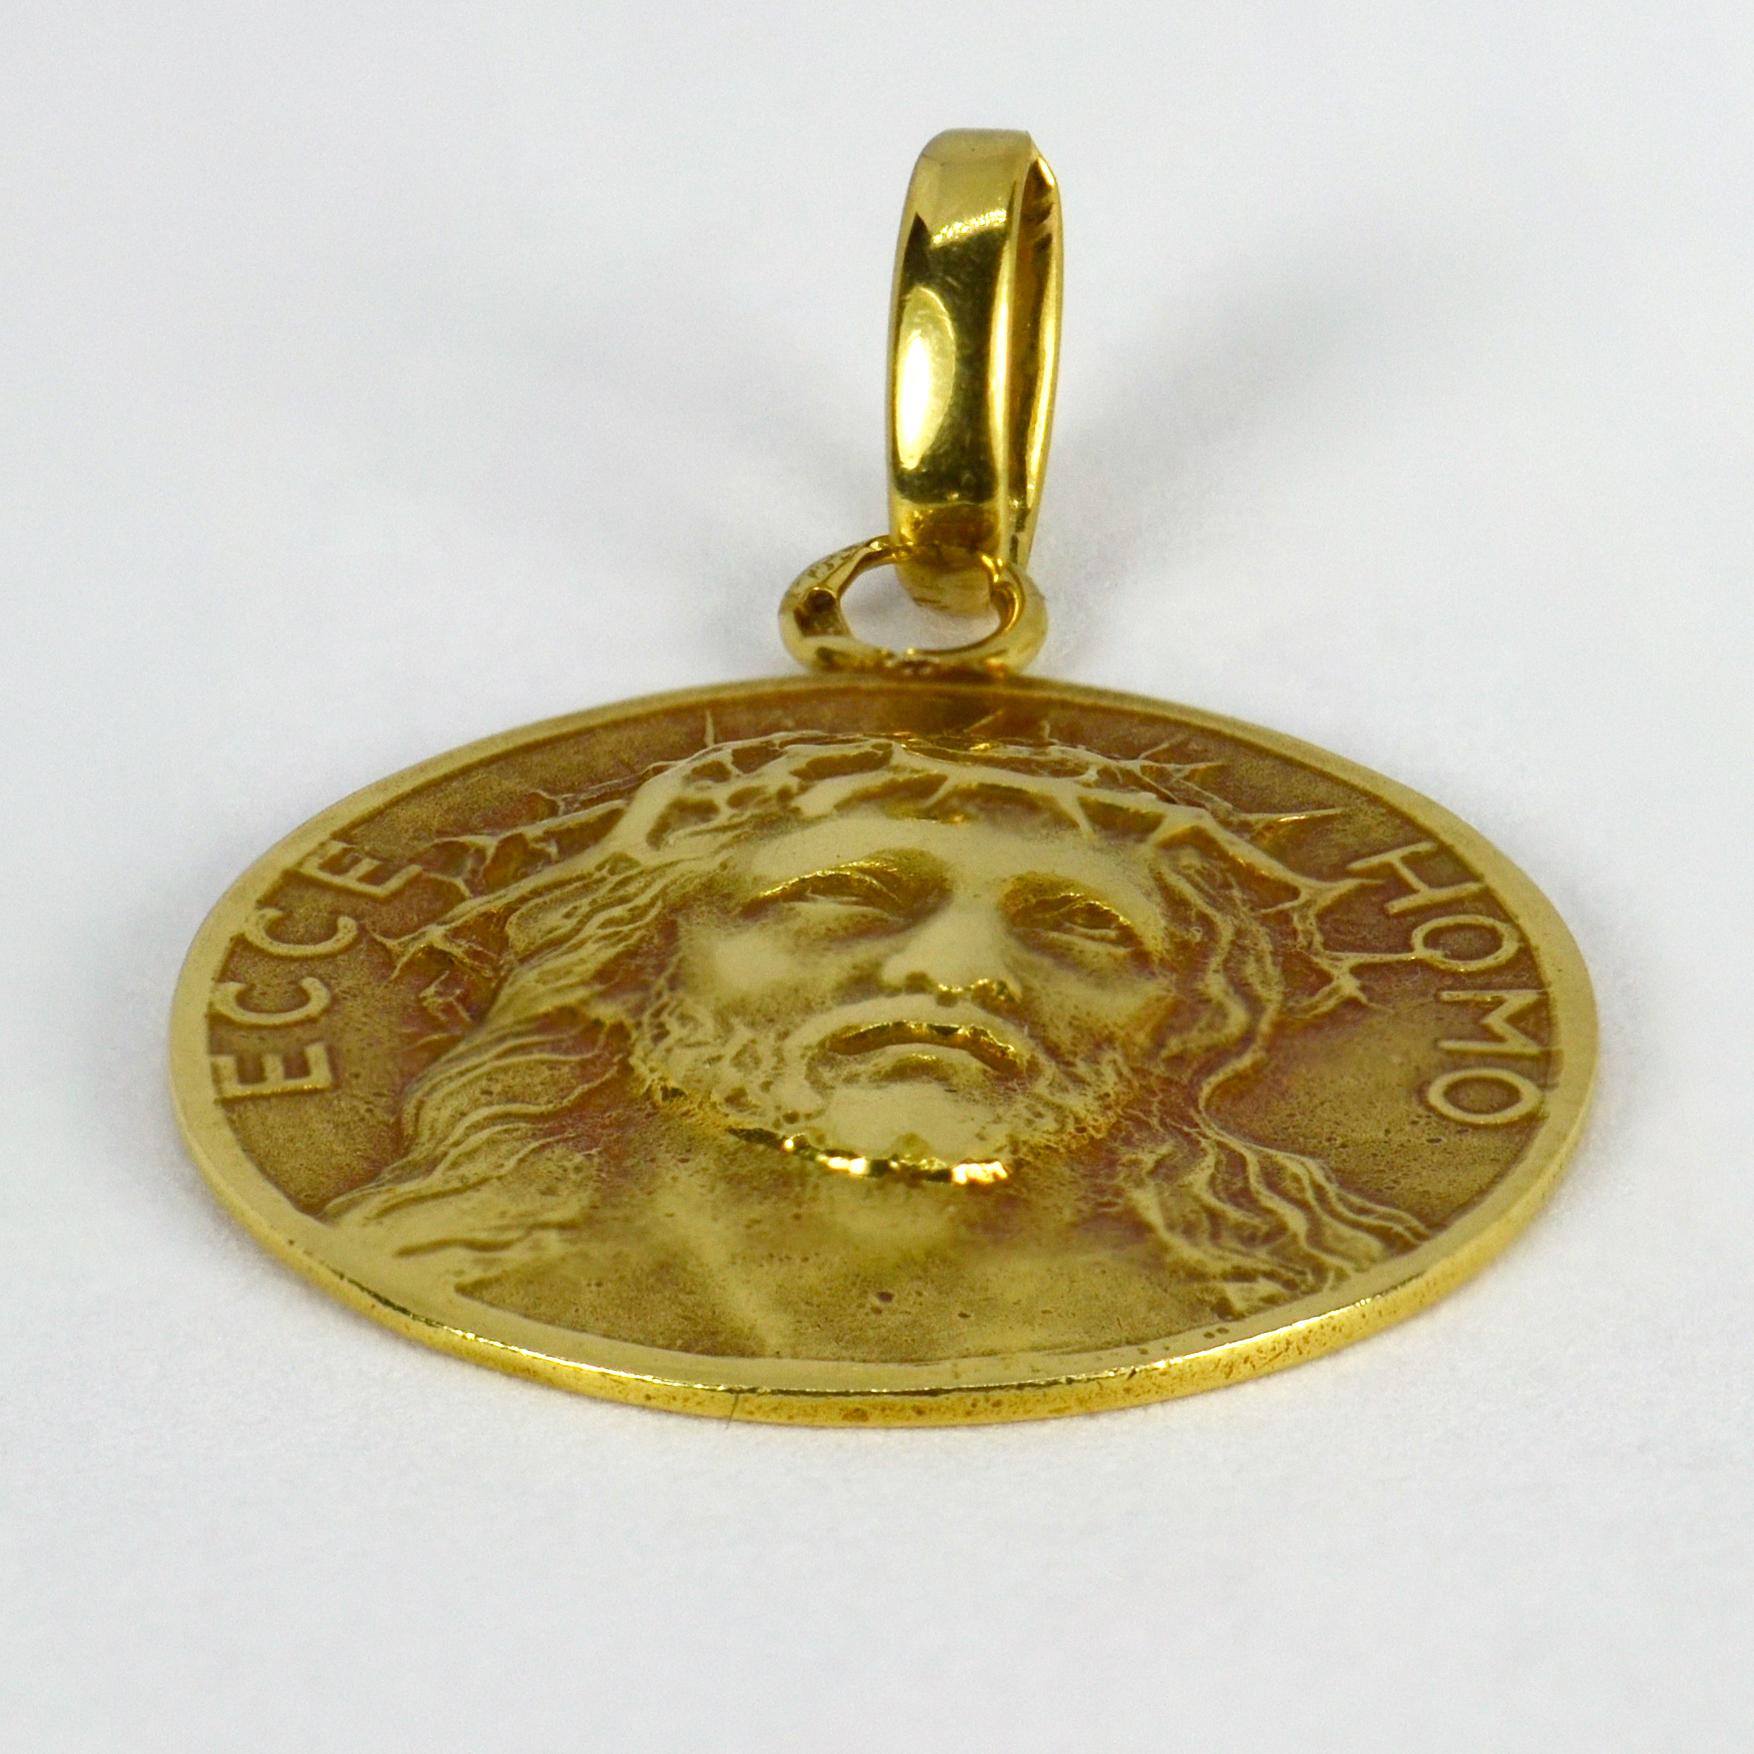 A French 18 karat (18K) yellow gold charm pendant designed as a round medal depicting Christ wearing the Crown of Thorns, with the words ‘Ecce Homo’ (Behold the man) - the words used by Pontius Pilate to present Jesus to the crowd before his